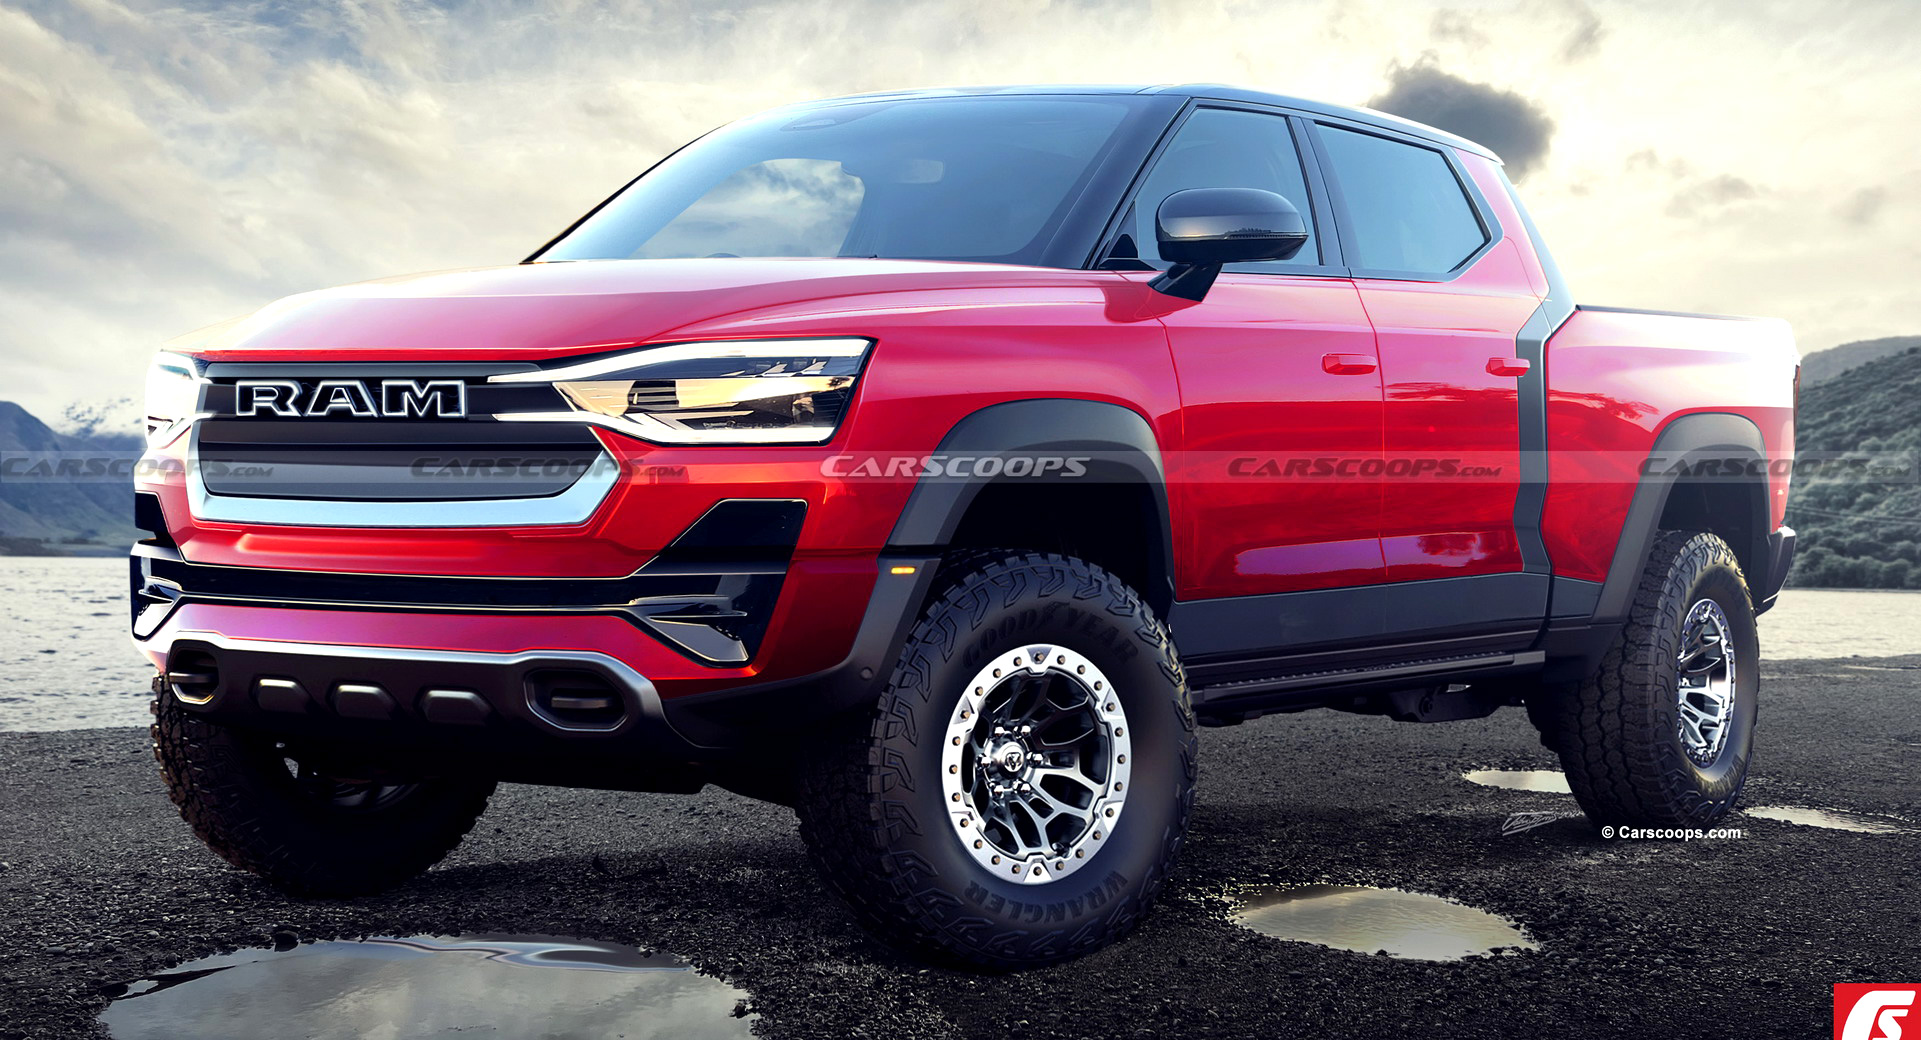 Ram Truck Debuts Two New Concept Ram 1500 Pickups